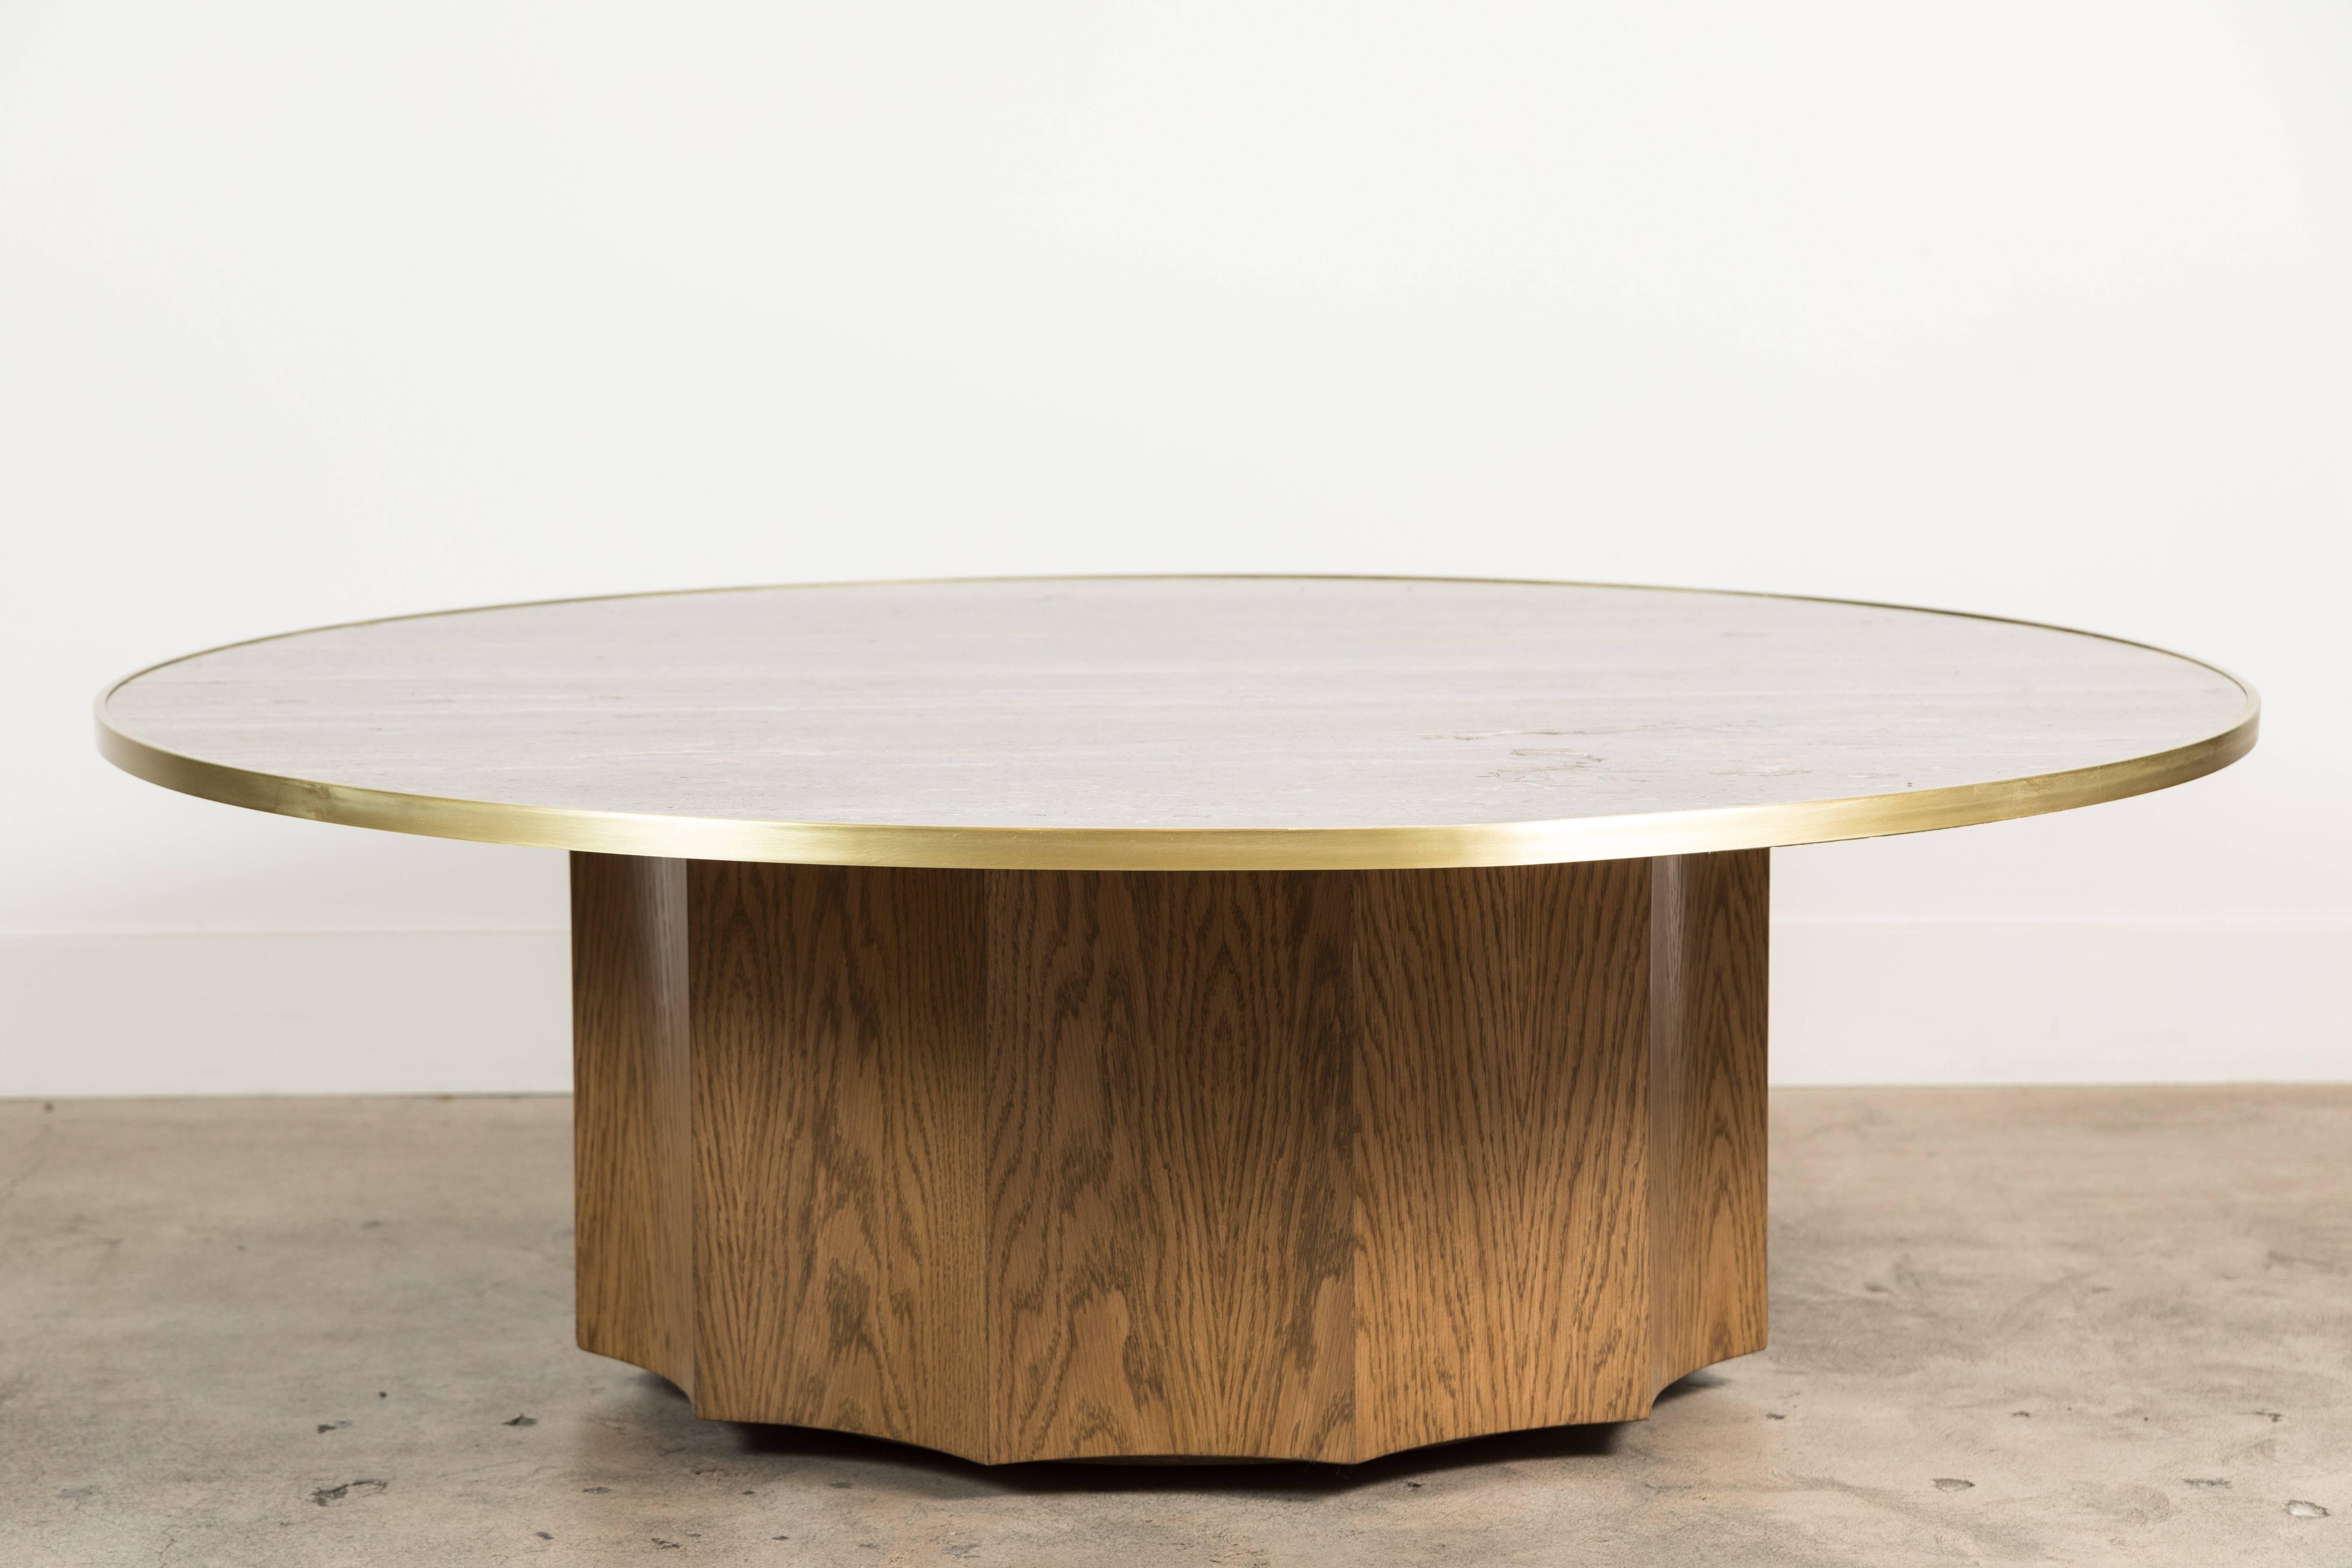 The Normandie Cocktail Table features a fluted white oak or American walnut base with a brass-trimmed stone top. Available in three sizes. Shown here in Titanium Travertine and Smoked Oak. 

Variations:
36